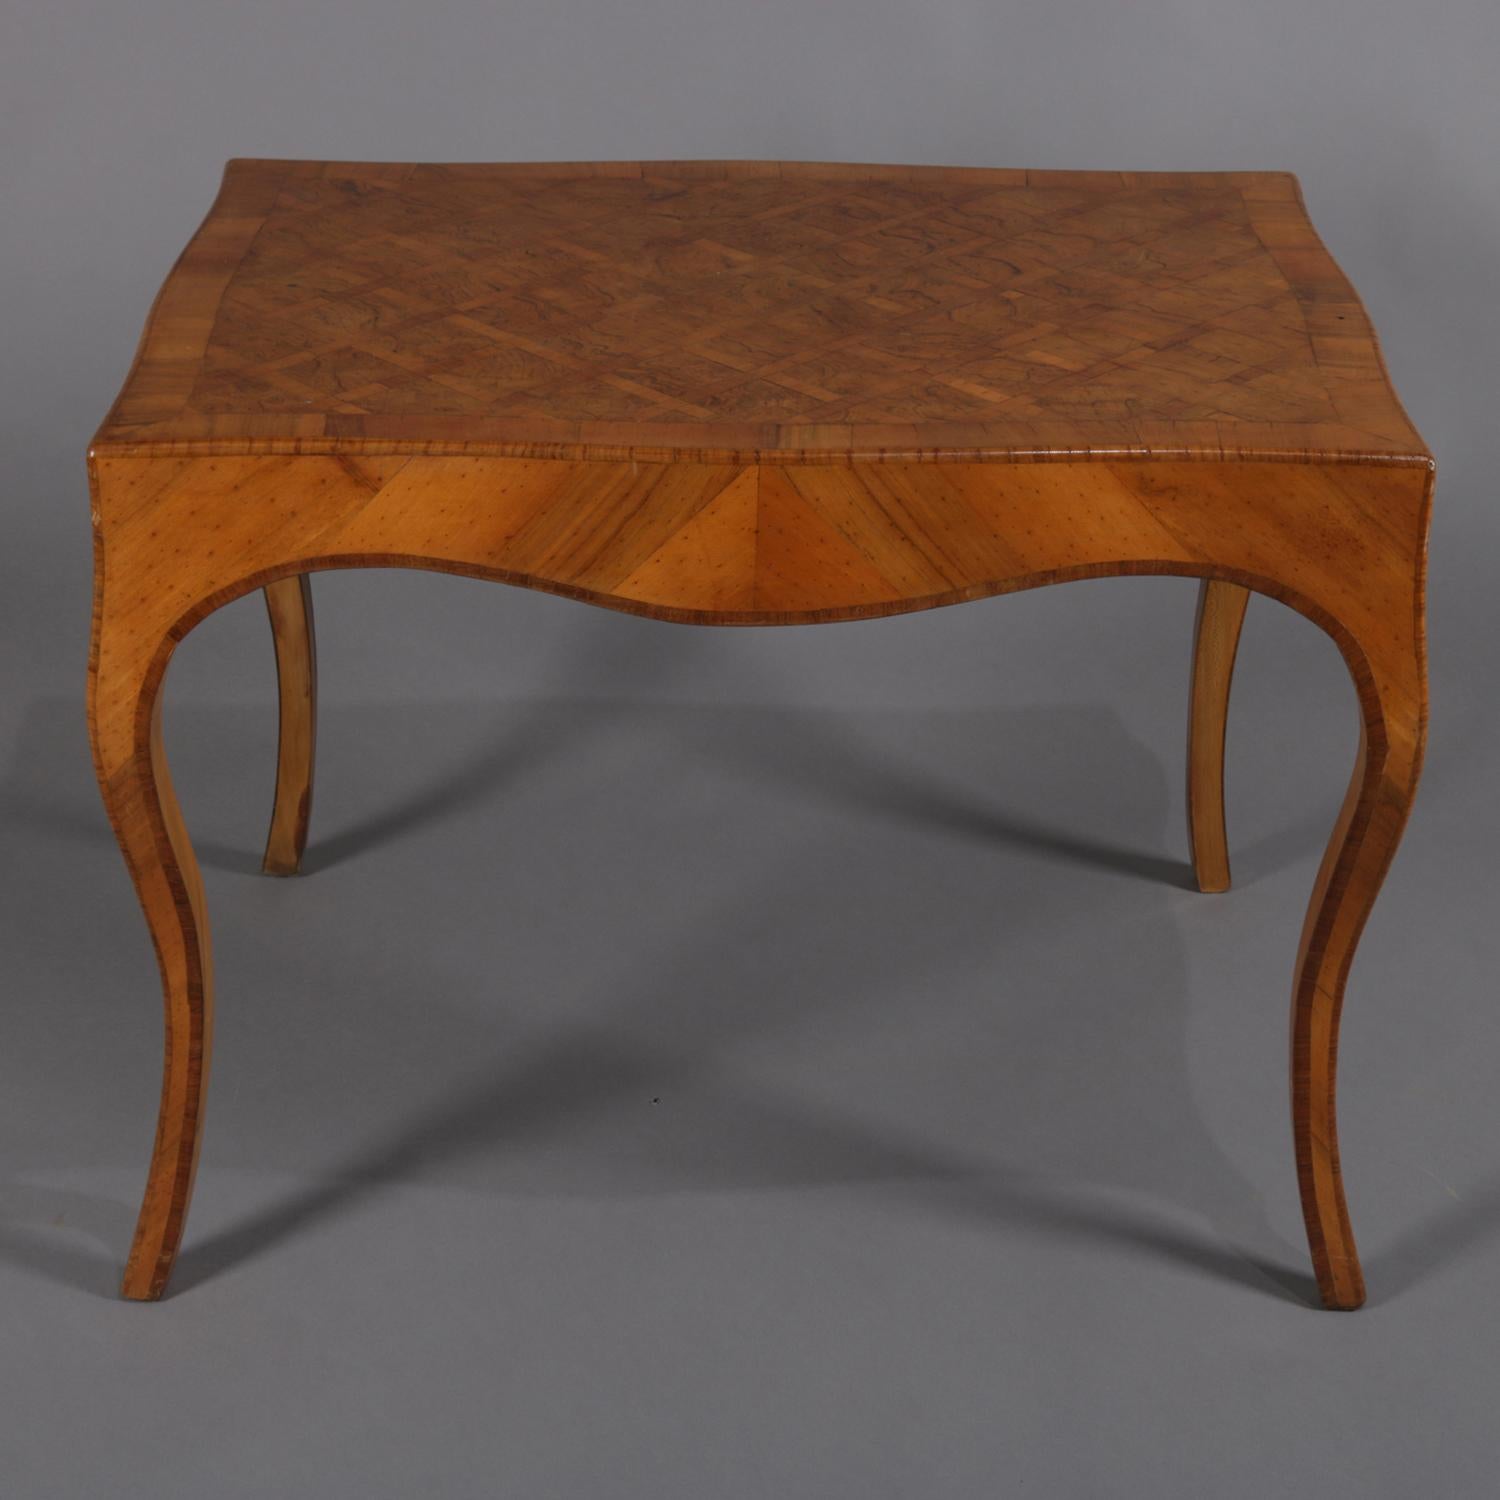 Antique Italian low centre table features mahogany construction with simple and curvilinear form with satinwood parquetry inlaid top over bookmatched skirt and cabriole legs and burl crossbanding throughout, 19th century.

***DELIVERY NOTICE – Due